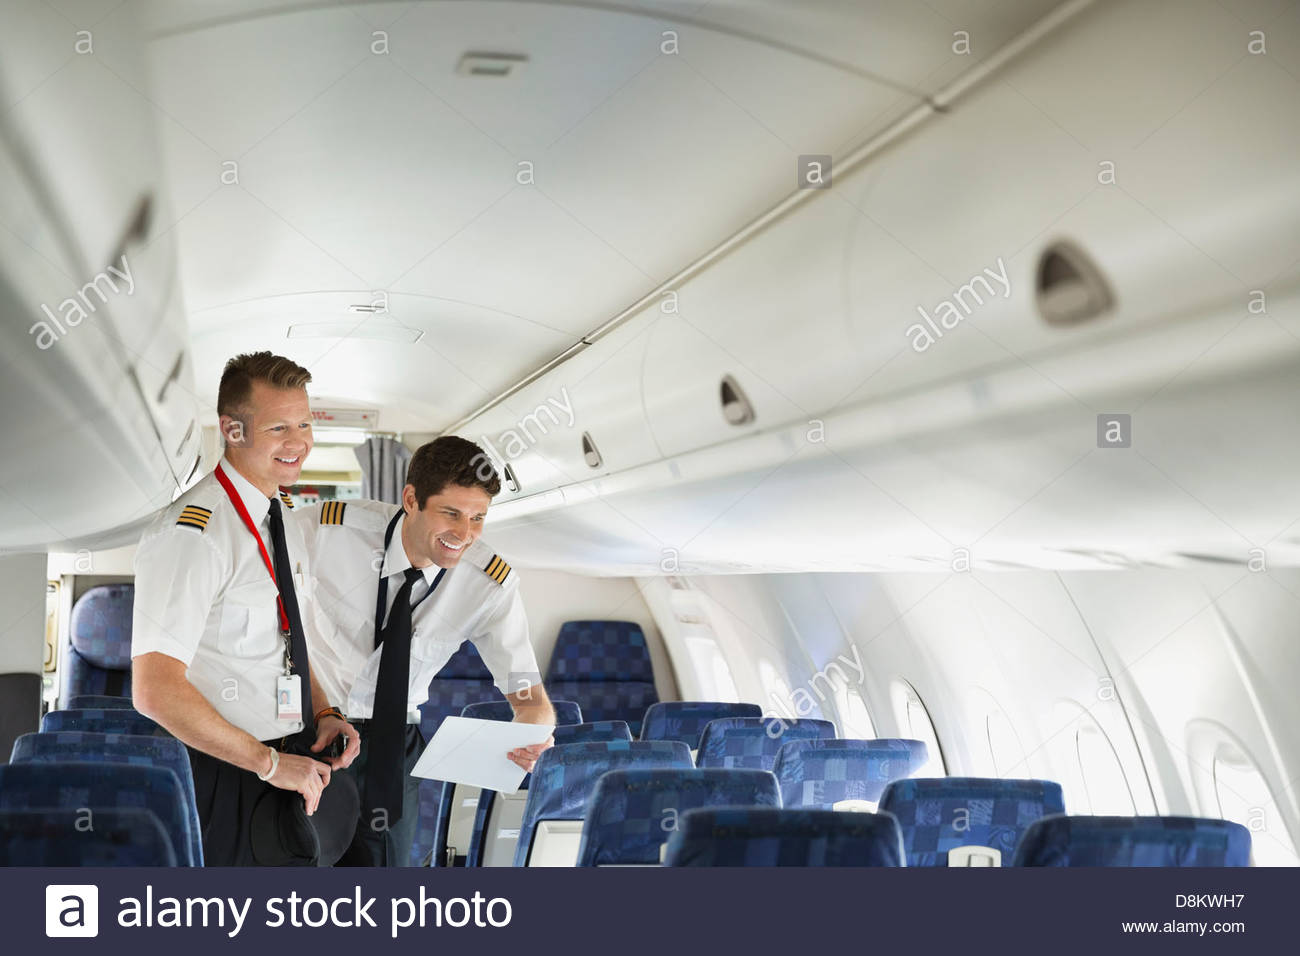 Male pilot looking out window in airplane Banque D'Images